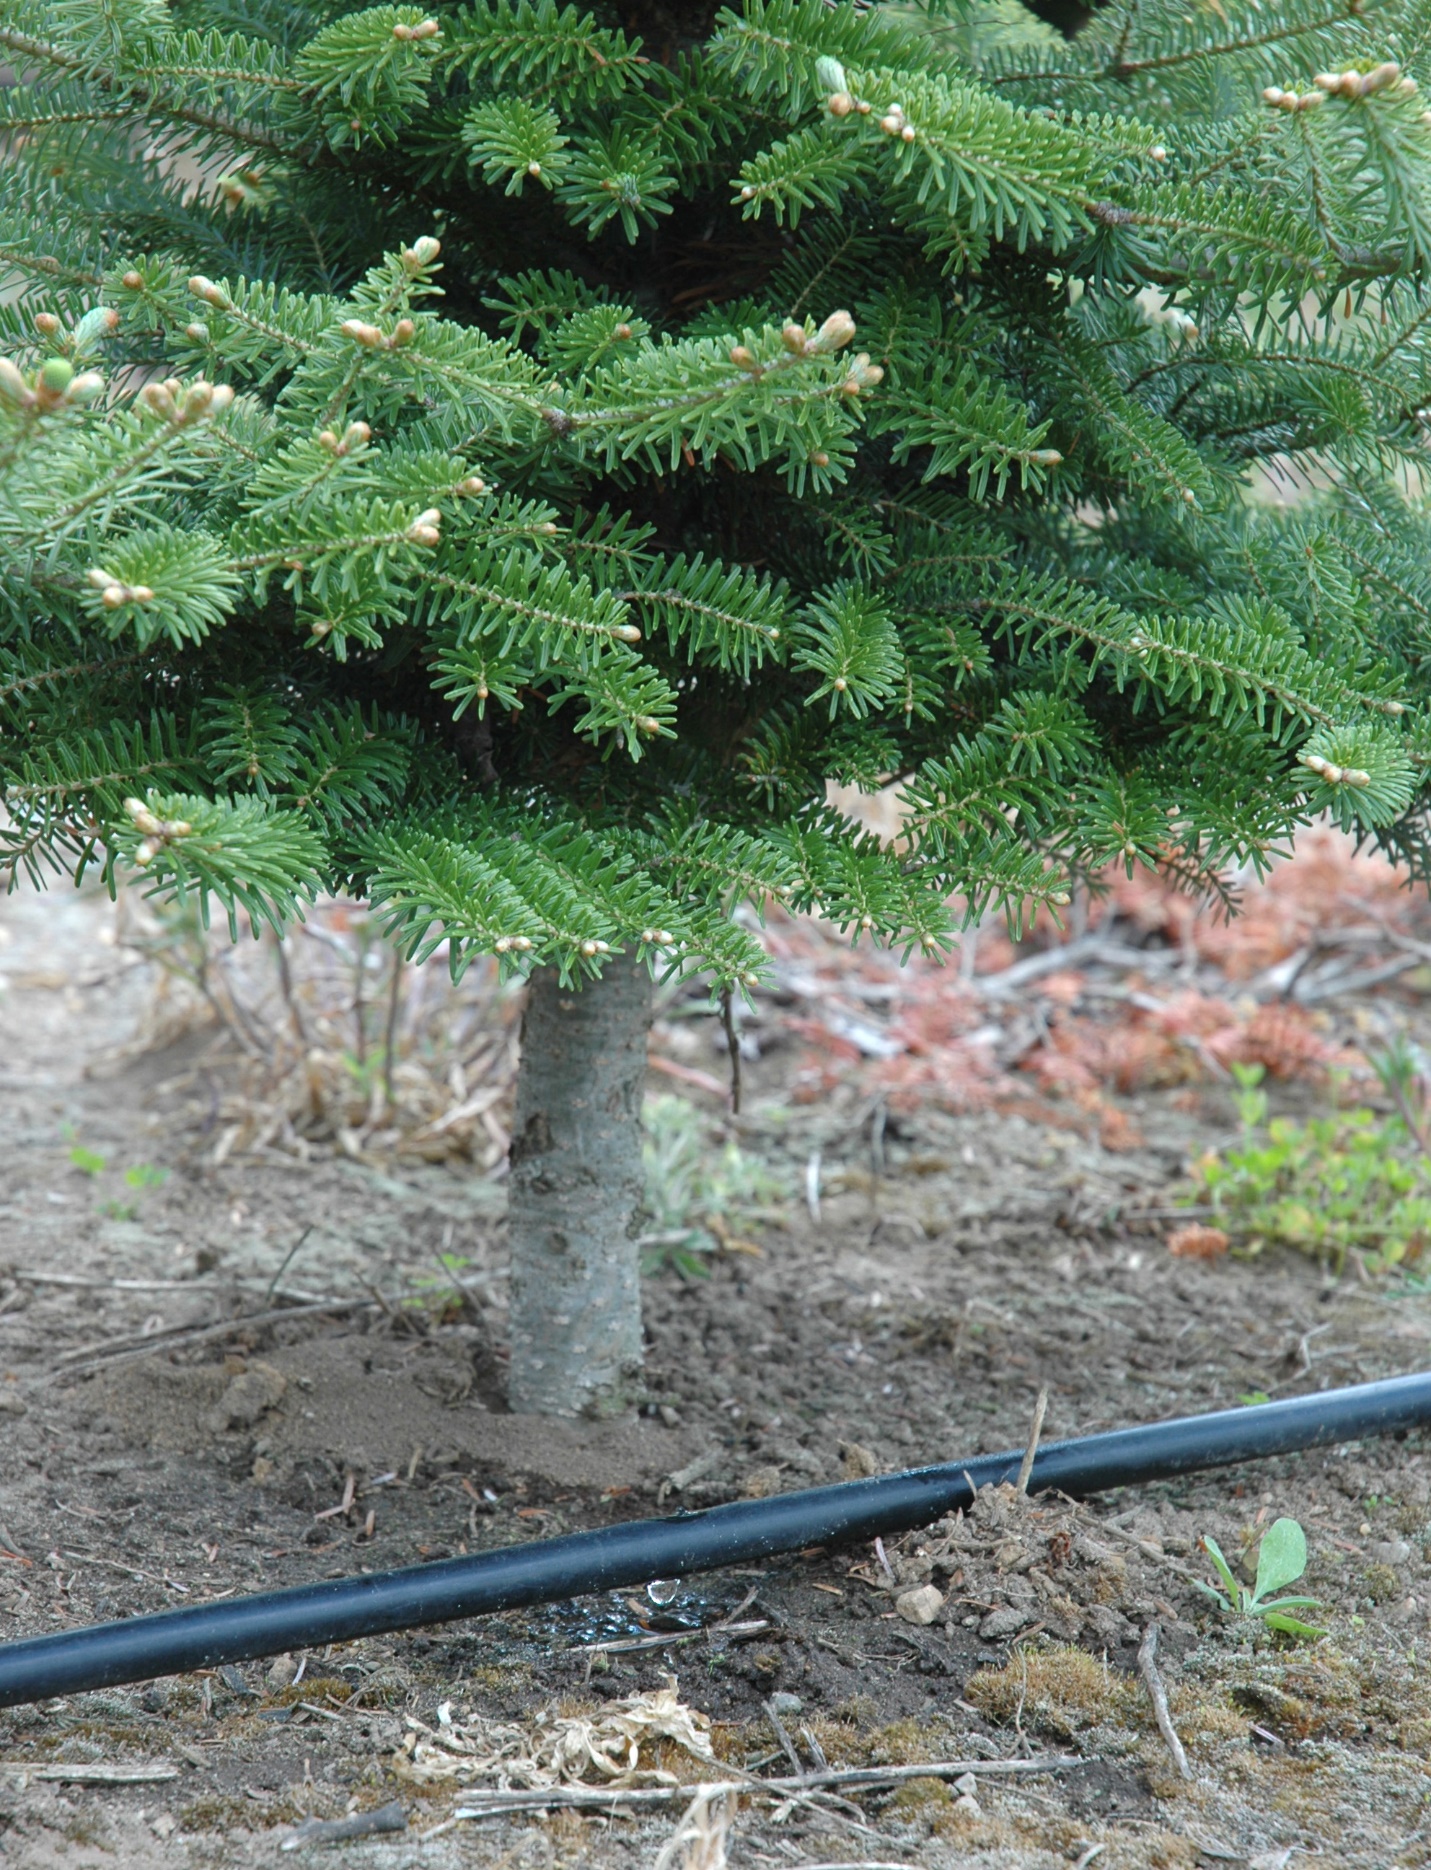 A hose lays on the ground next to a Christmas tree.